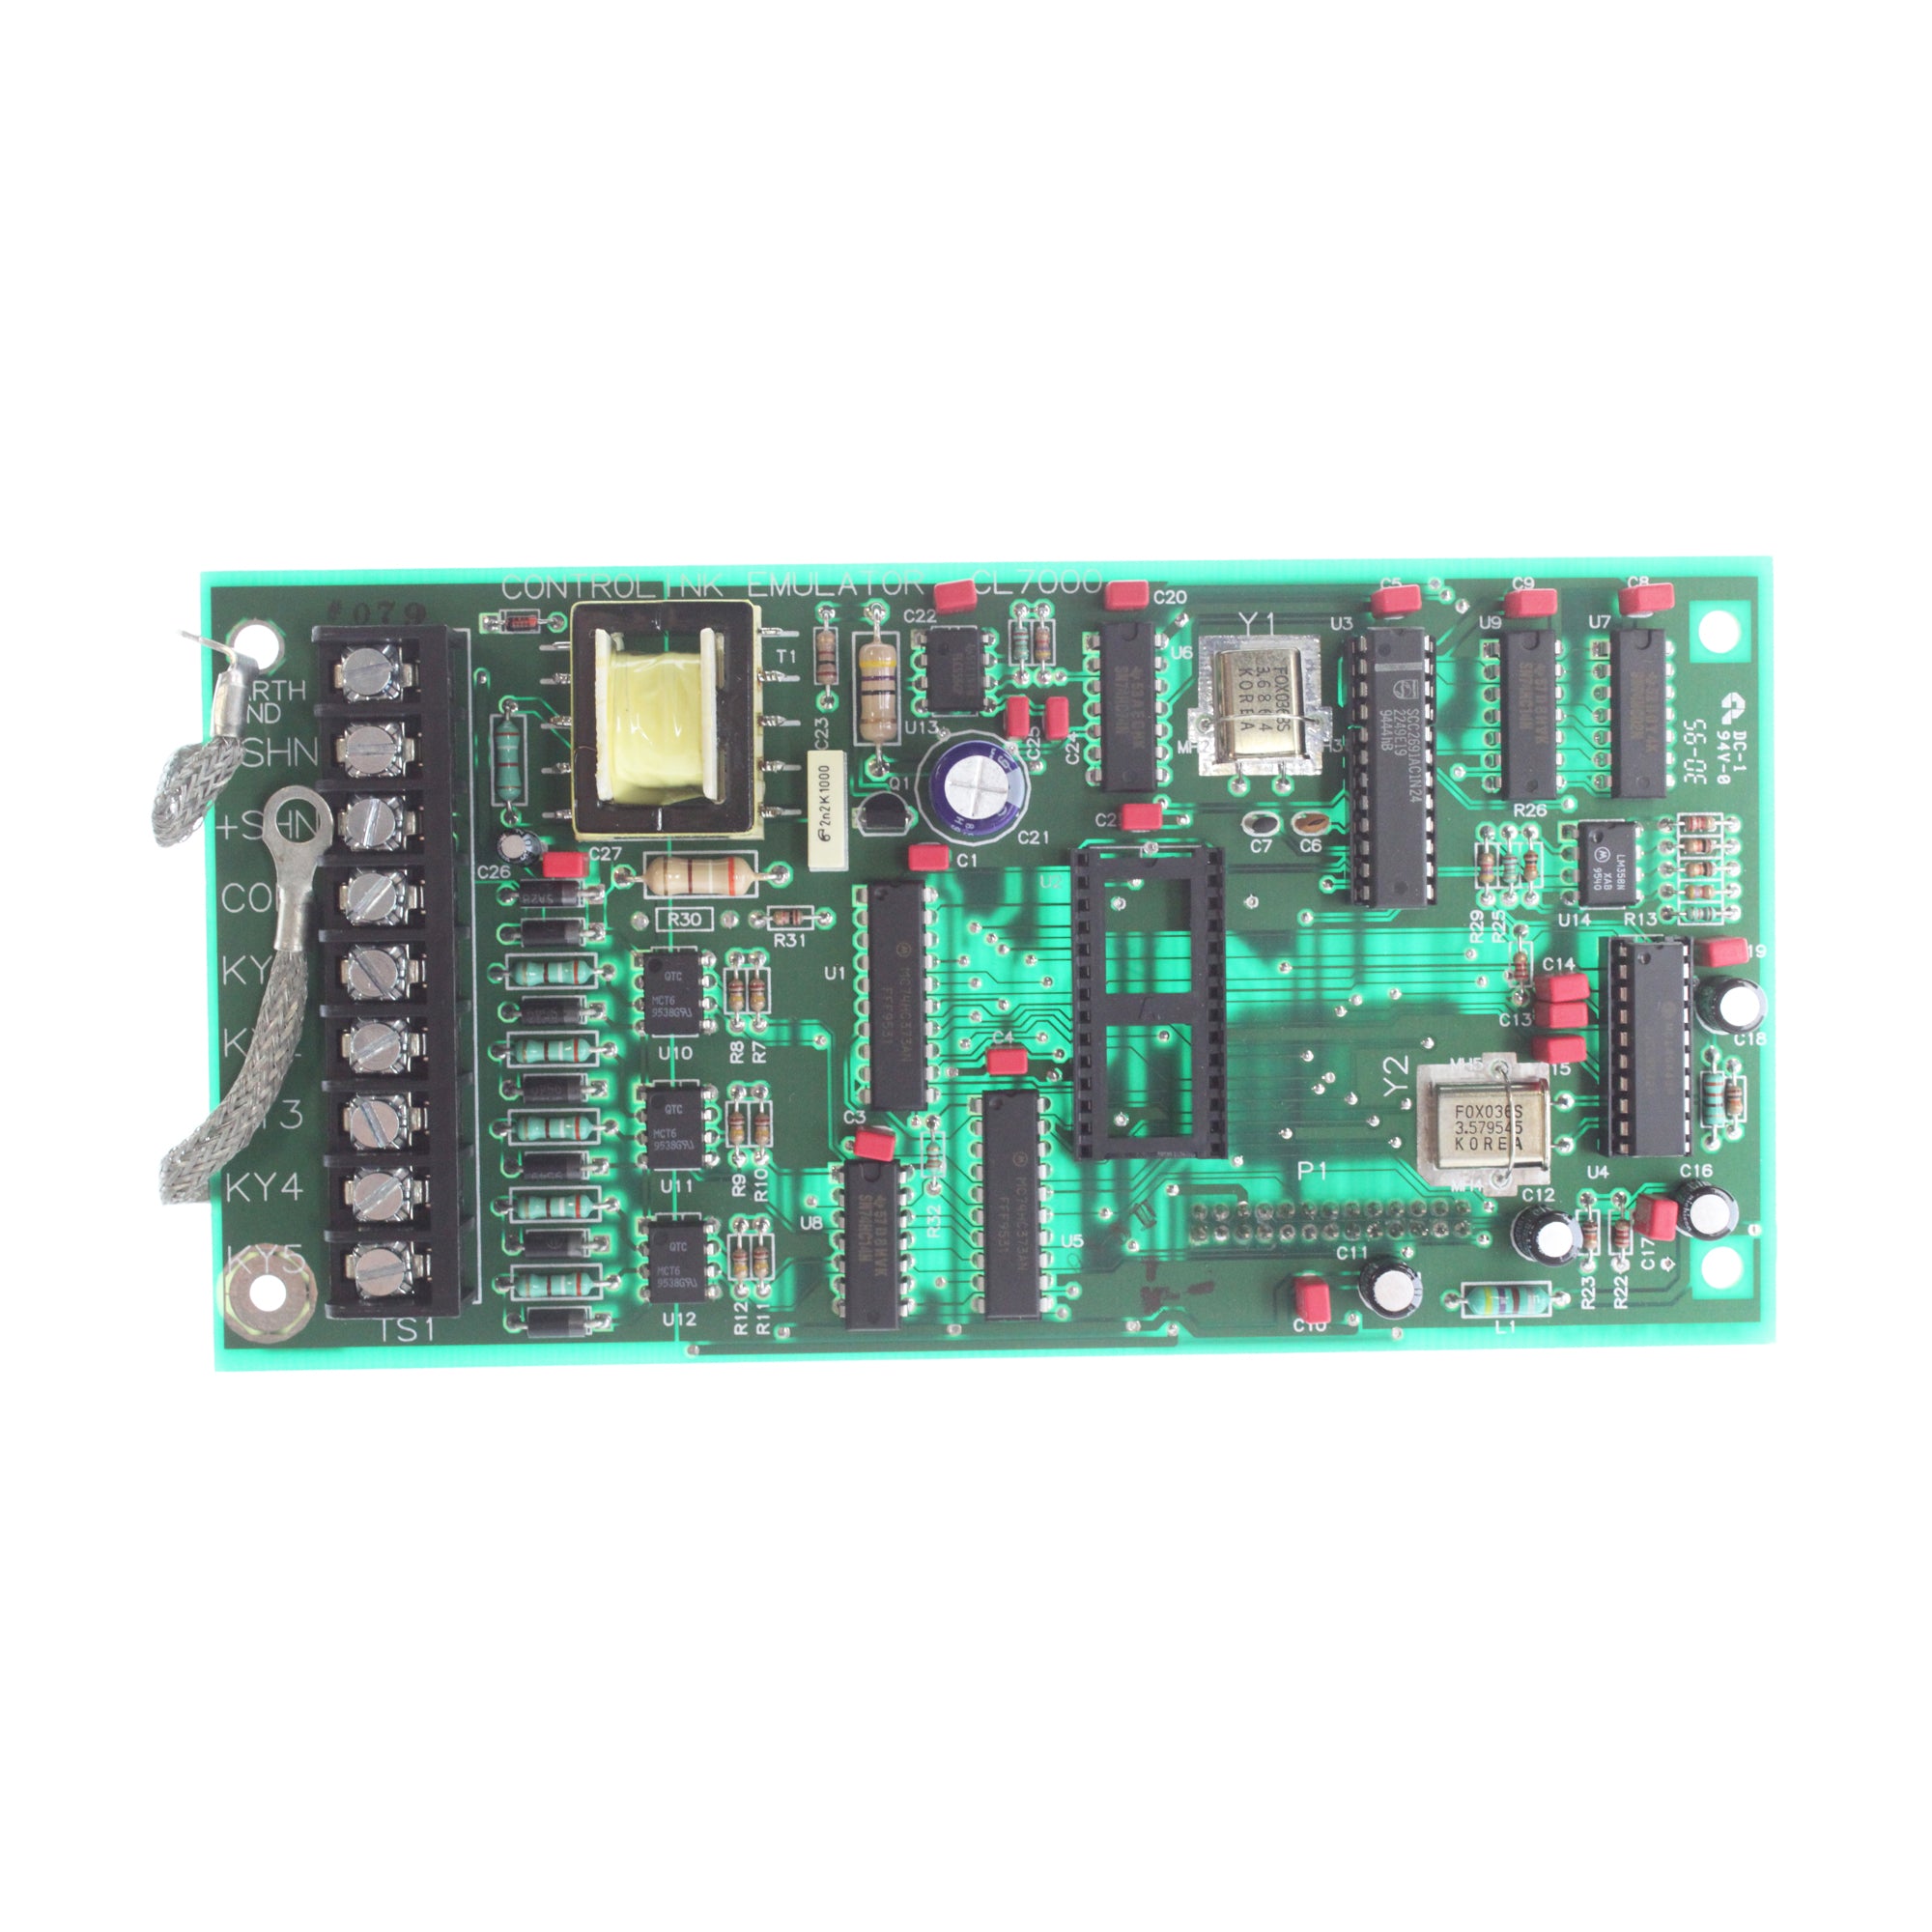 Detection Systems, DETECTION SYSTEMS CL7001 CONFIGURATION CONTROLLER BOARD